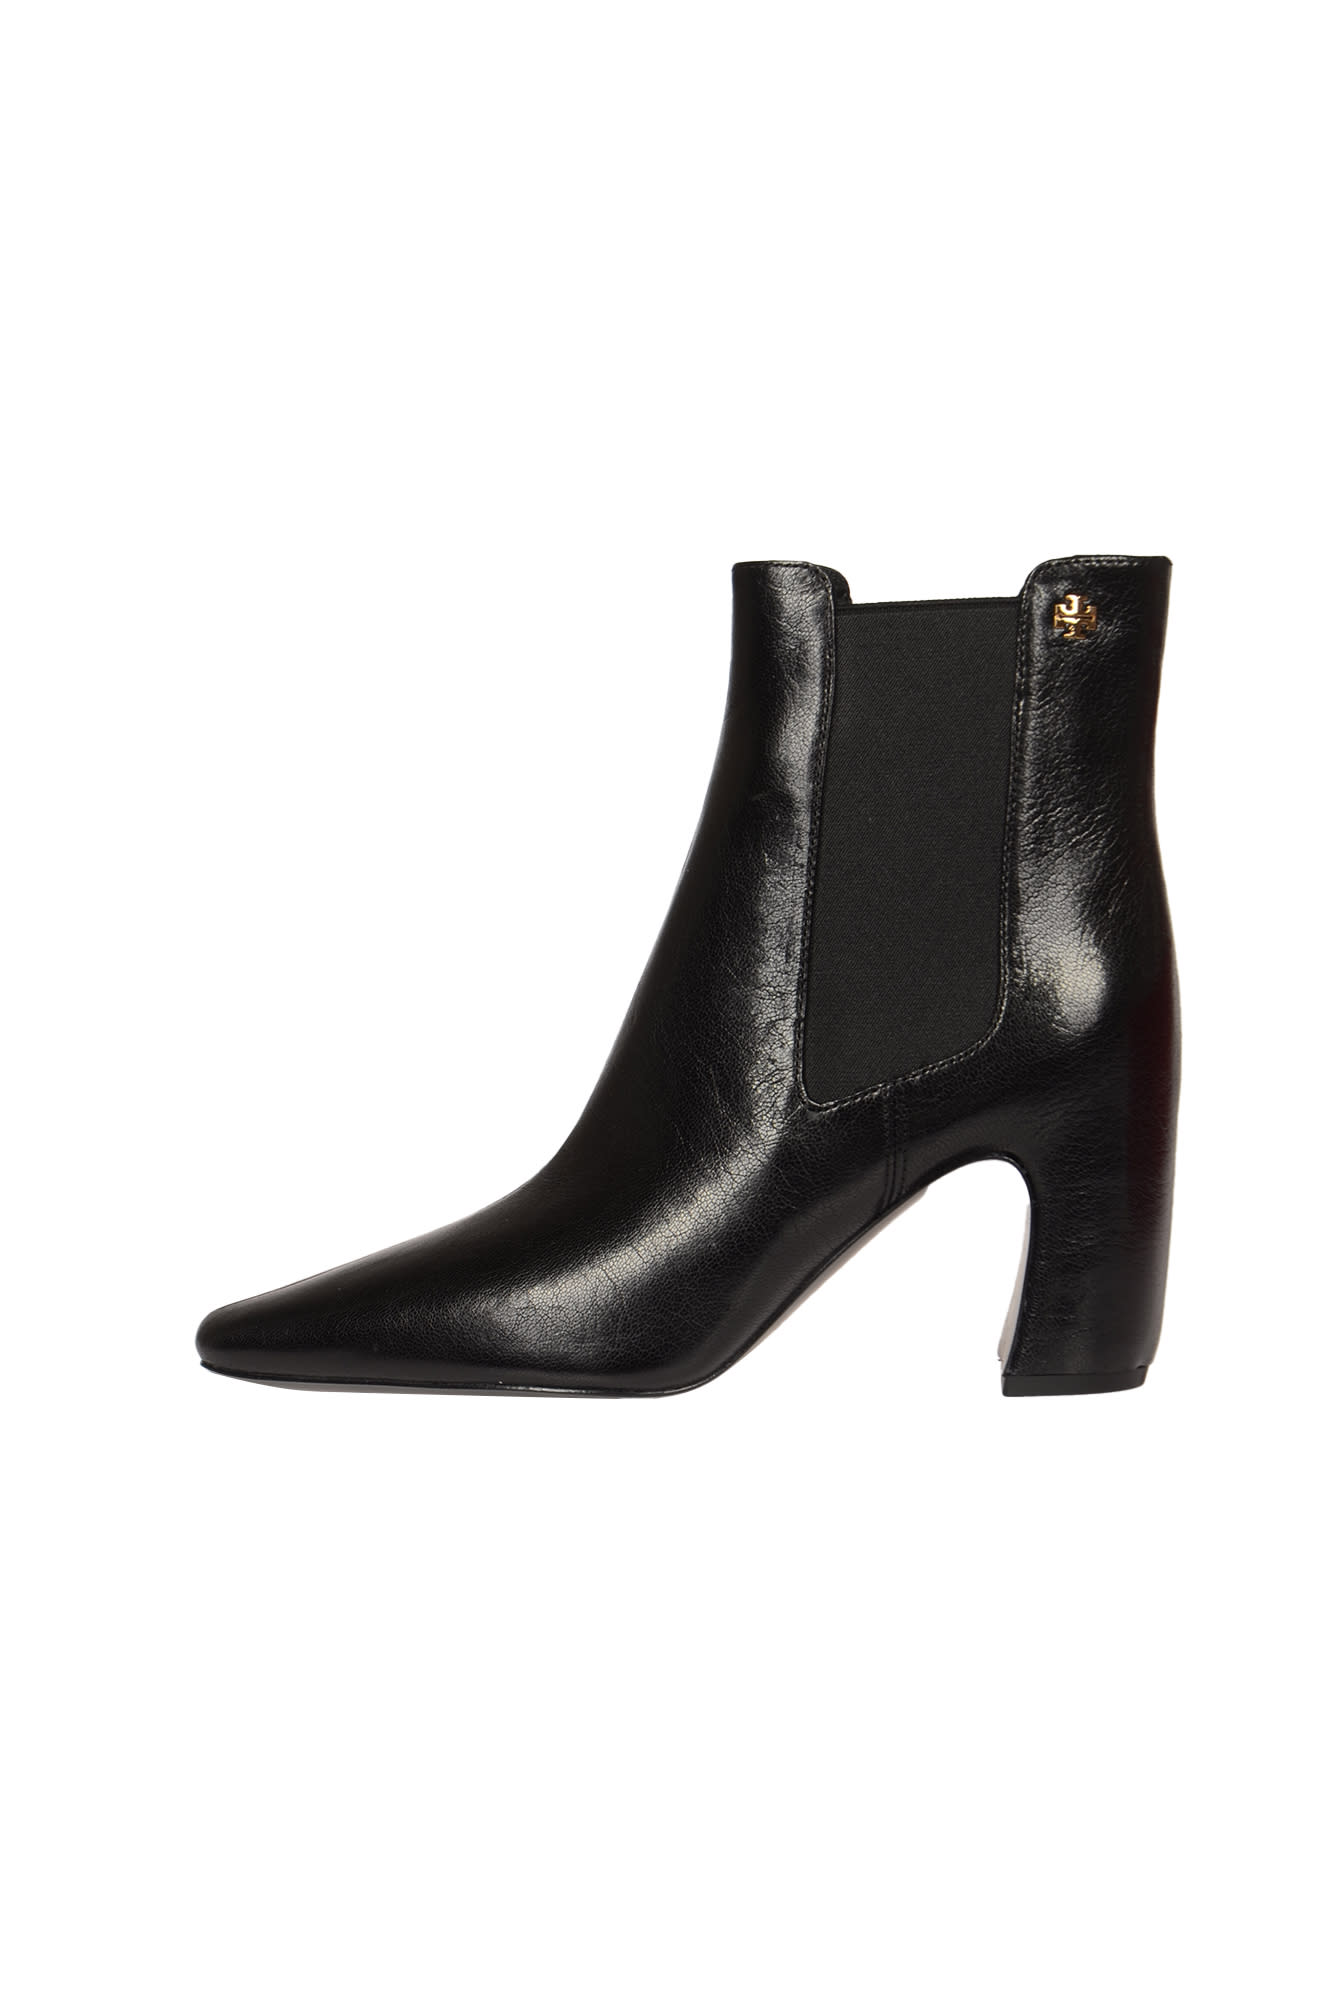 Tory Burch Banana Chelsea Boots In Perfect Black